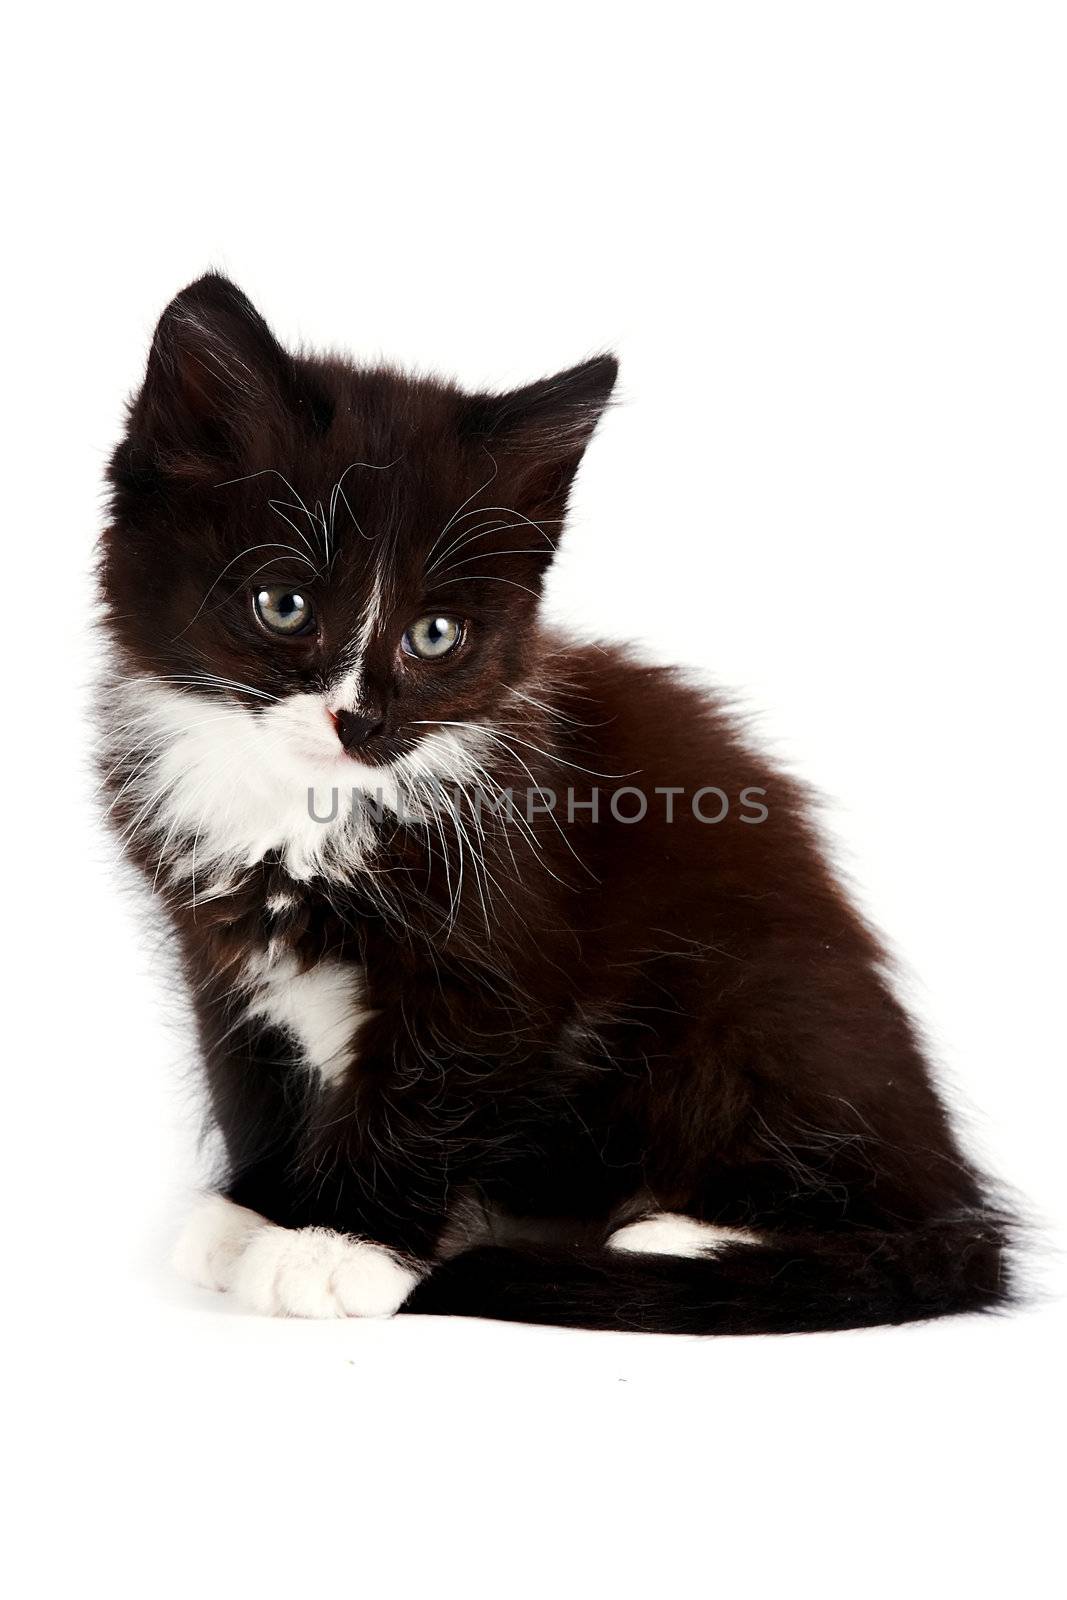 Black-and-white kitten on a white background